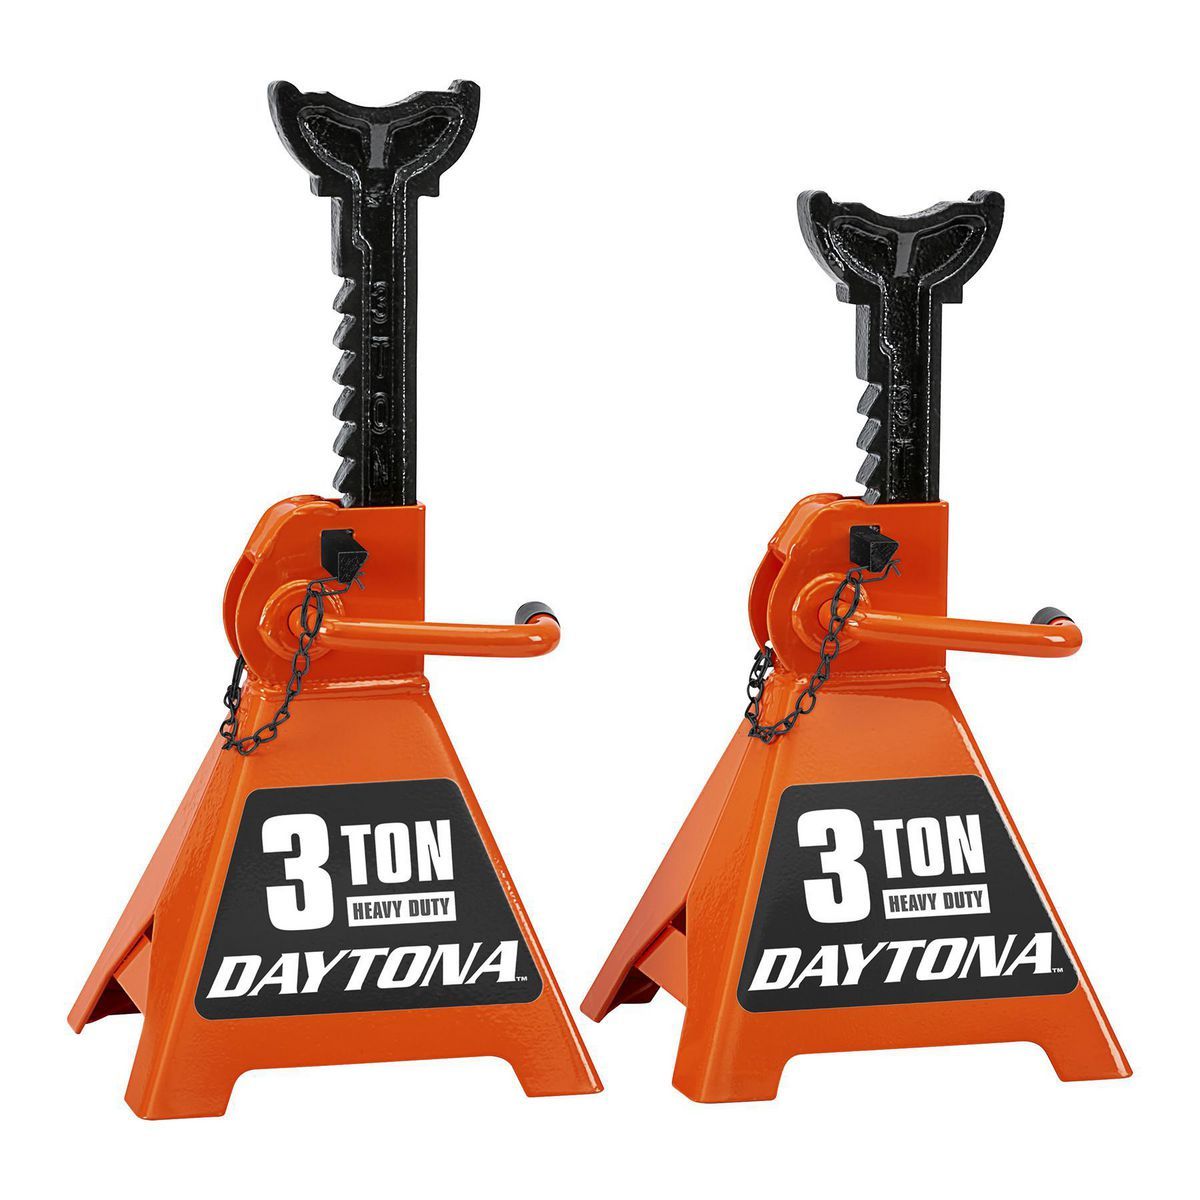 Harbor Freight Jack Stand Recall: Replacement Stands Added to